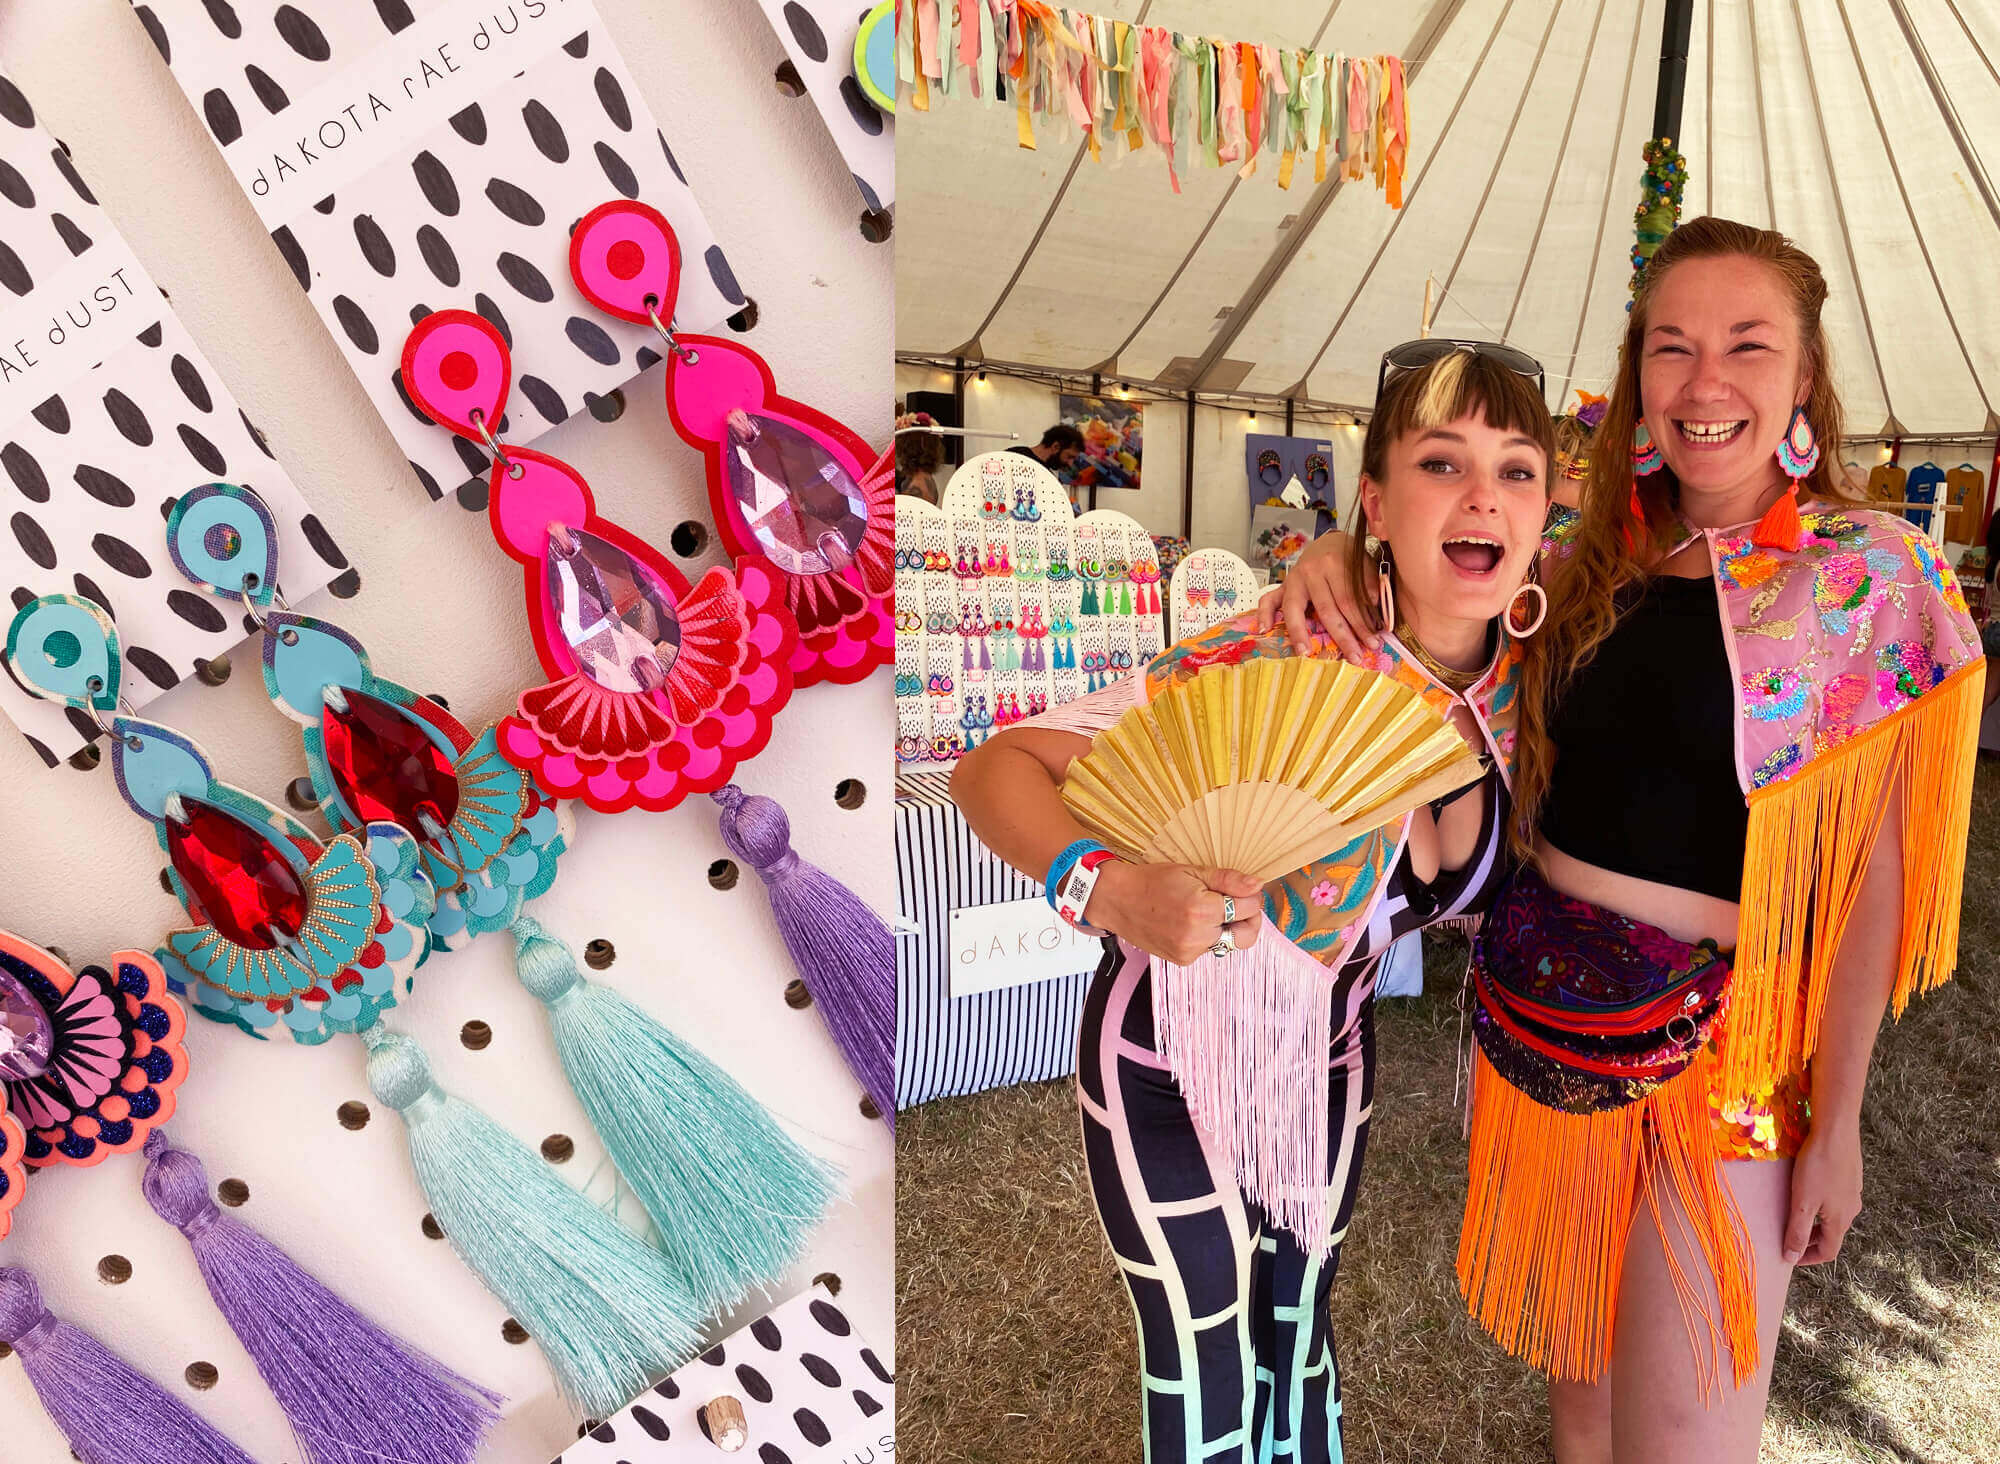 Two photos side by side. On the left a close up of a white pegboard displaying some colourful tassel earrings and festival jewellery. On the right two women standing side by side in colourful festival clothing smile at the camera. One is waving a fan and behind them is a colourful jewellery stall in a festival marquee.